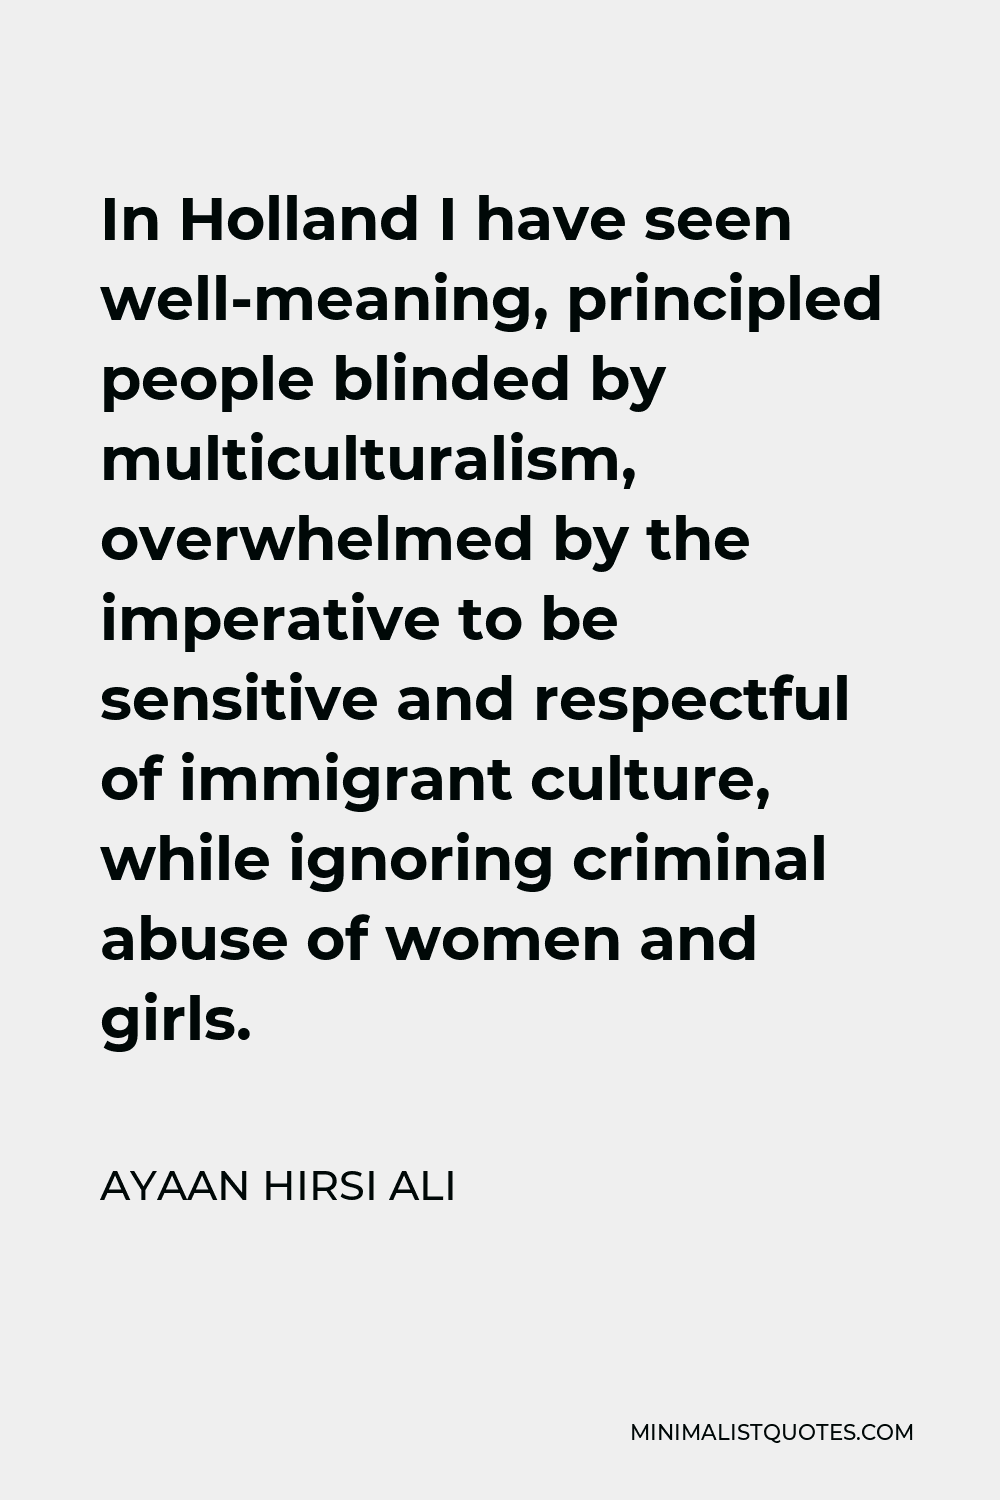 Ayaan Hirsi Ali Quote - In Holland I have seen well-meaning, principled people blinded by multiculturalism, overwhelmed by the imperative to be sensitive and respectful of immigrant culture, while ignoring criminal abuse of women and girls.